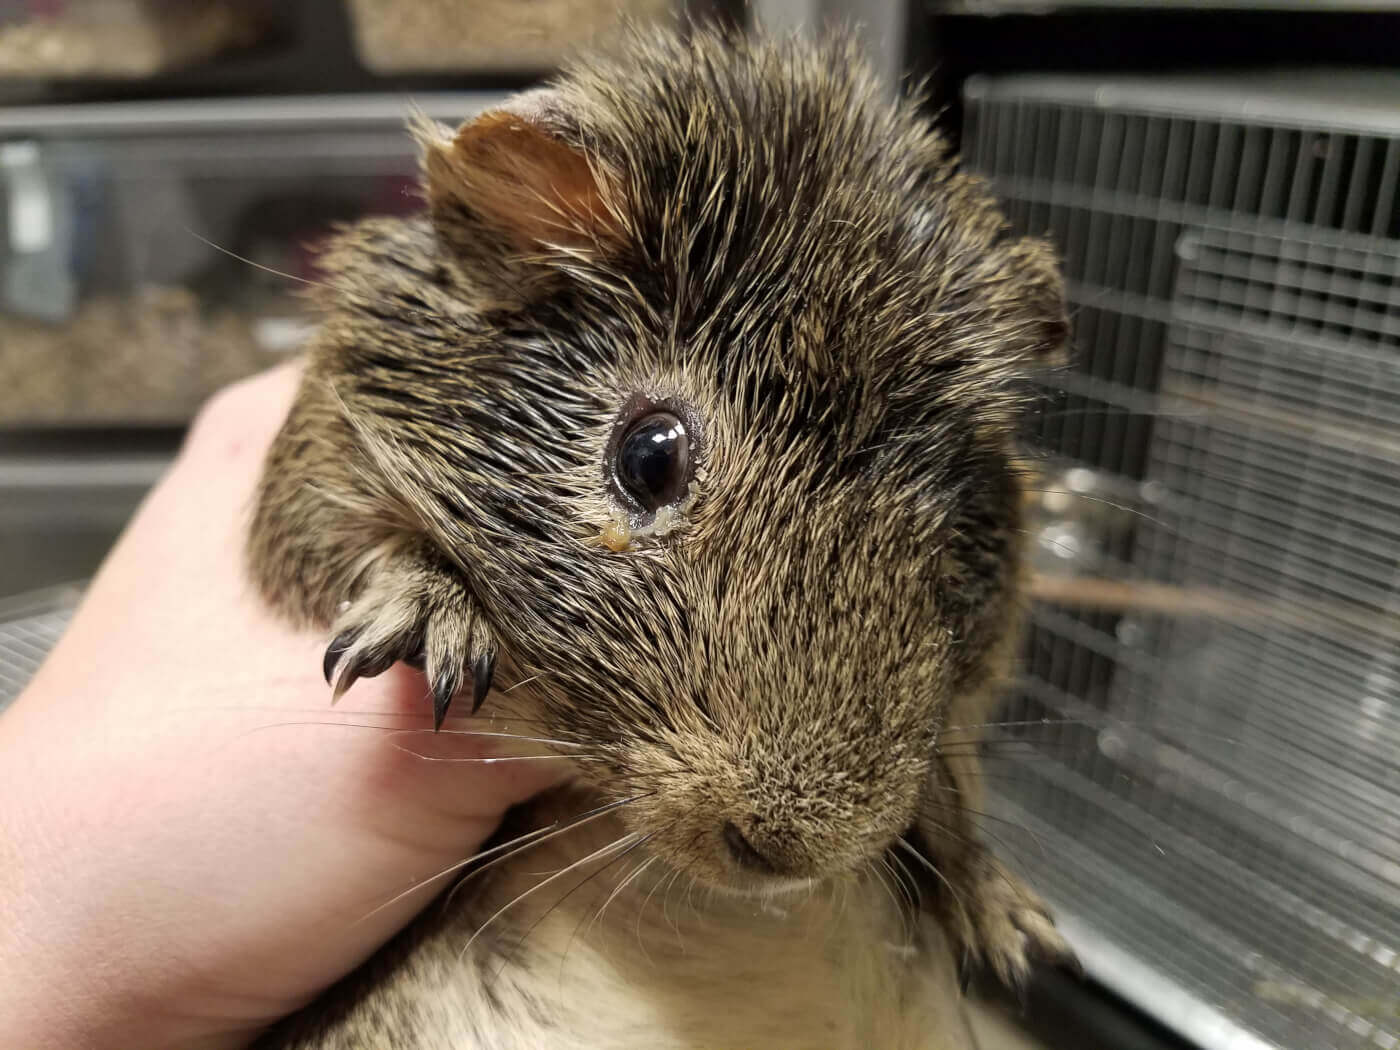 VIDEO: Guinea Pigs From PetSmart Hell Now Get Endless TLC